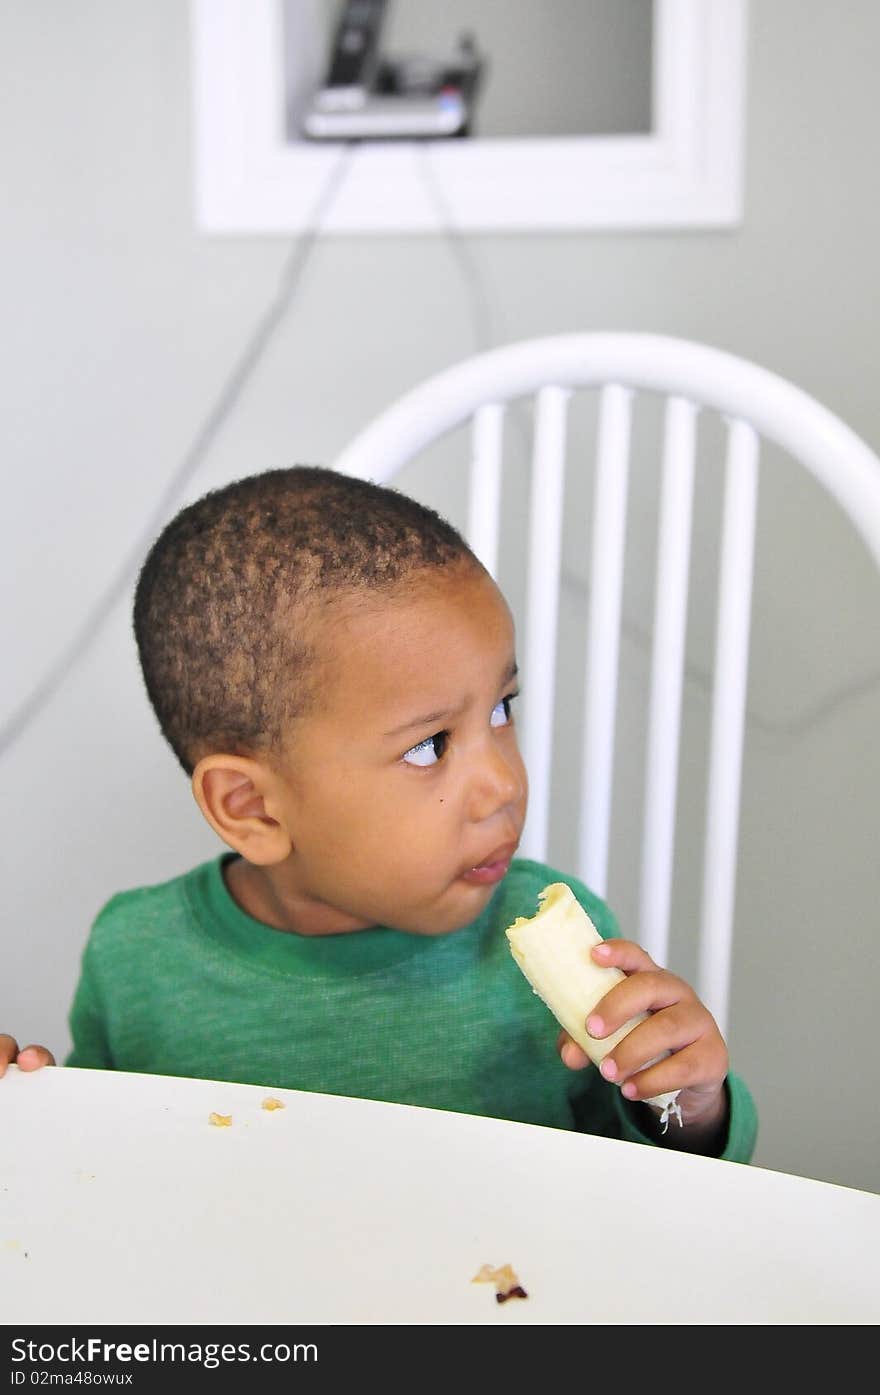 Young child sitting at table with banana in hand eating while looking away. Young child sitting at table with banana in hand eating while looking away